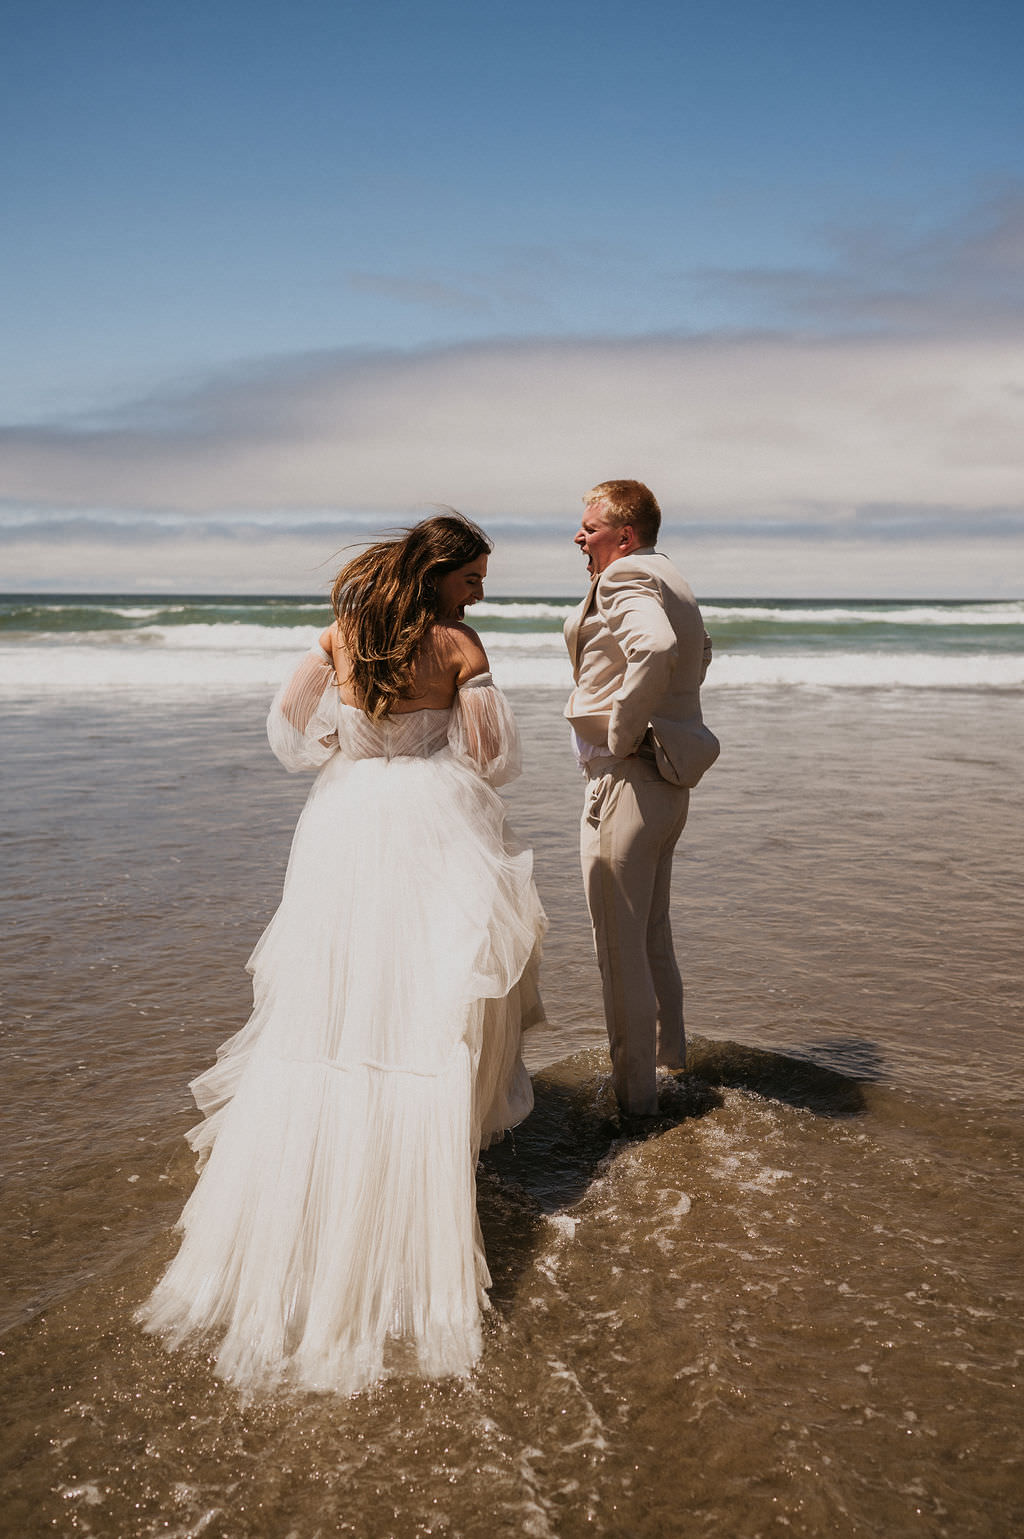 Bride and Groom in their beach elopement in the water.